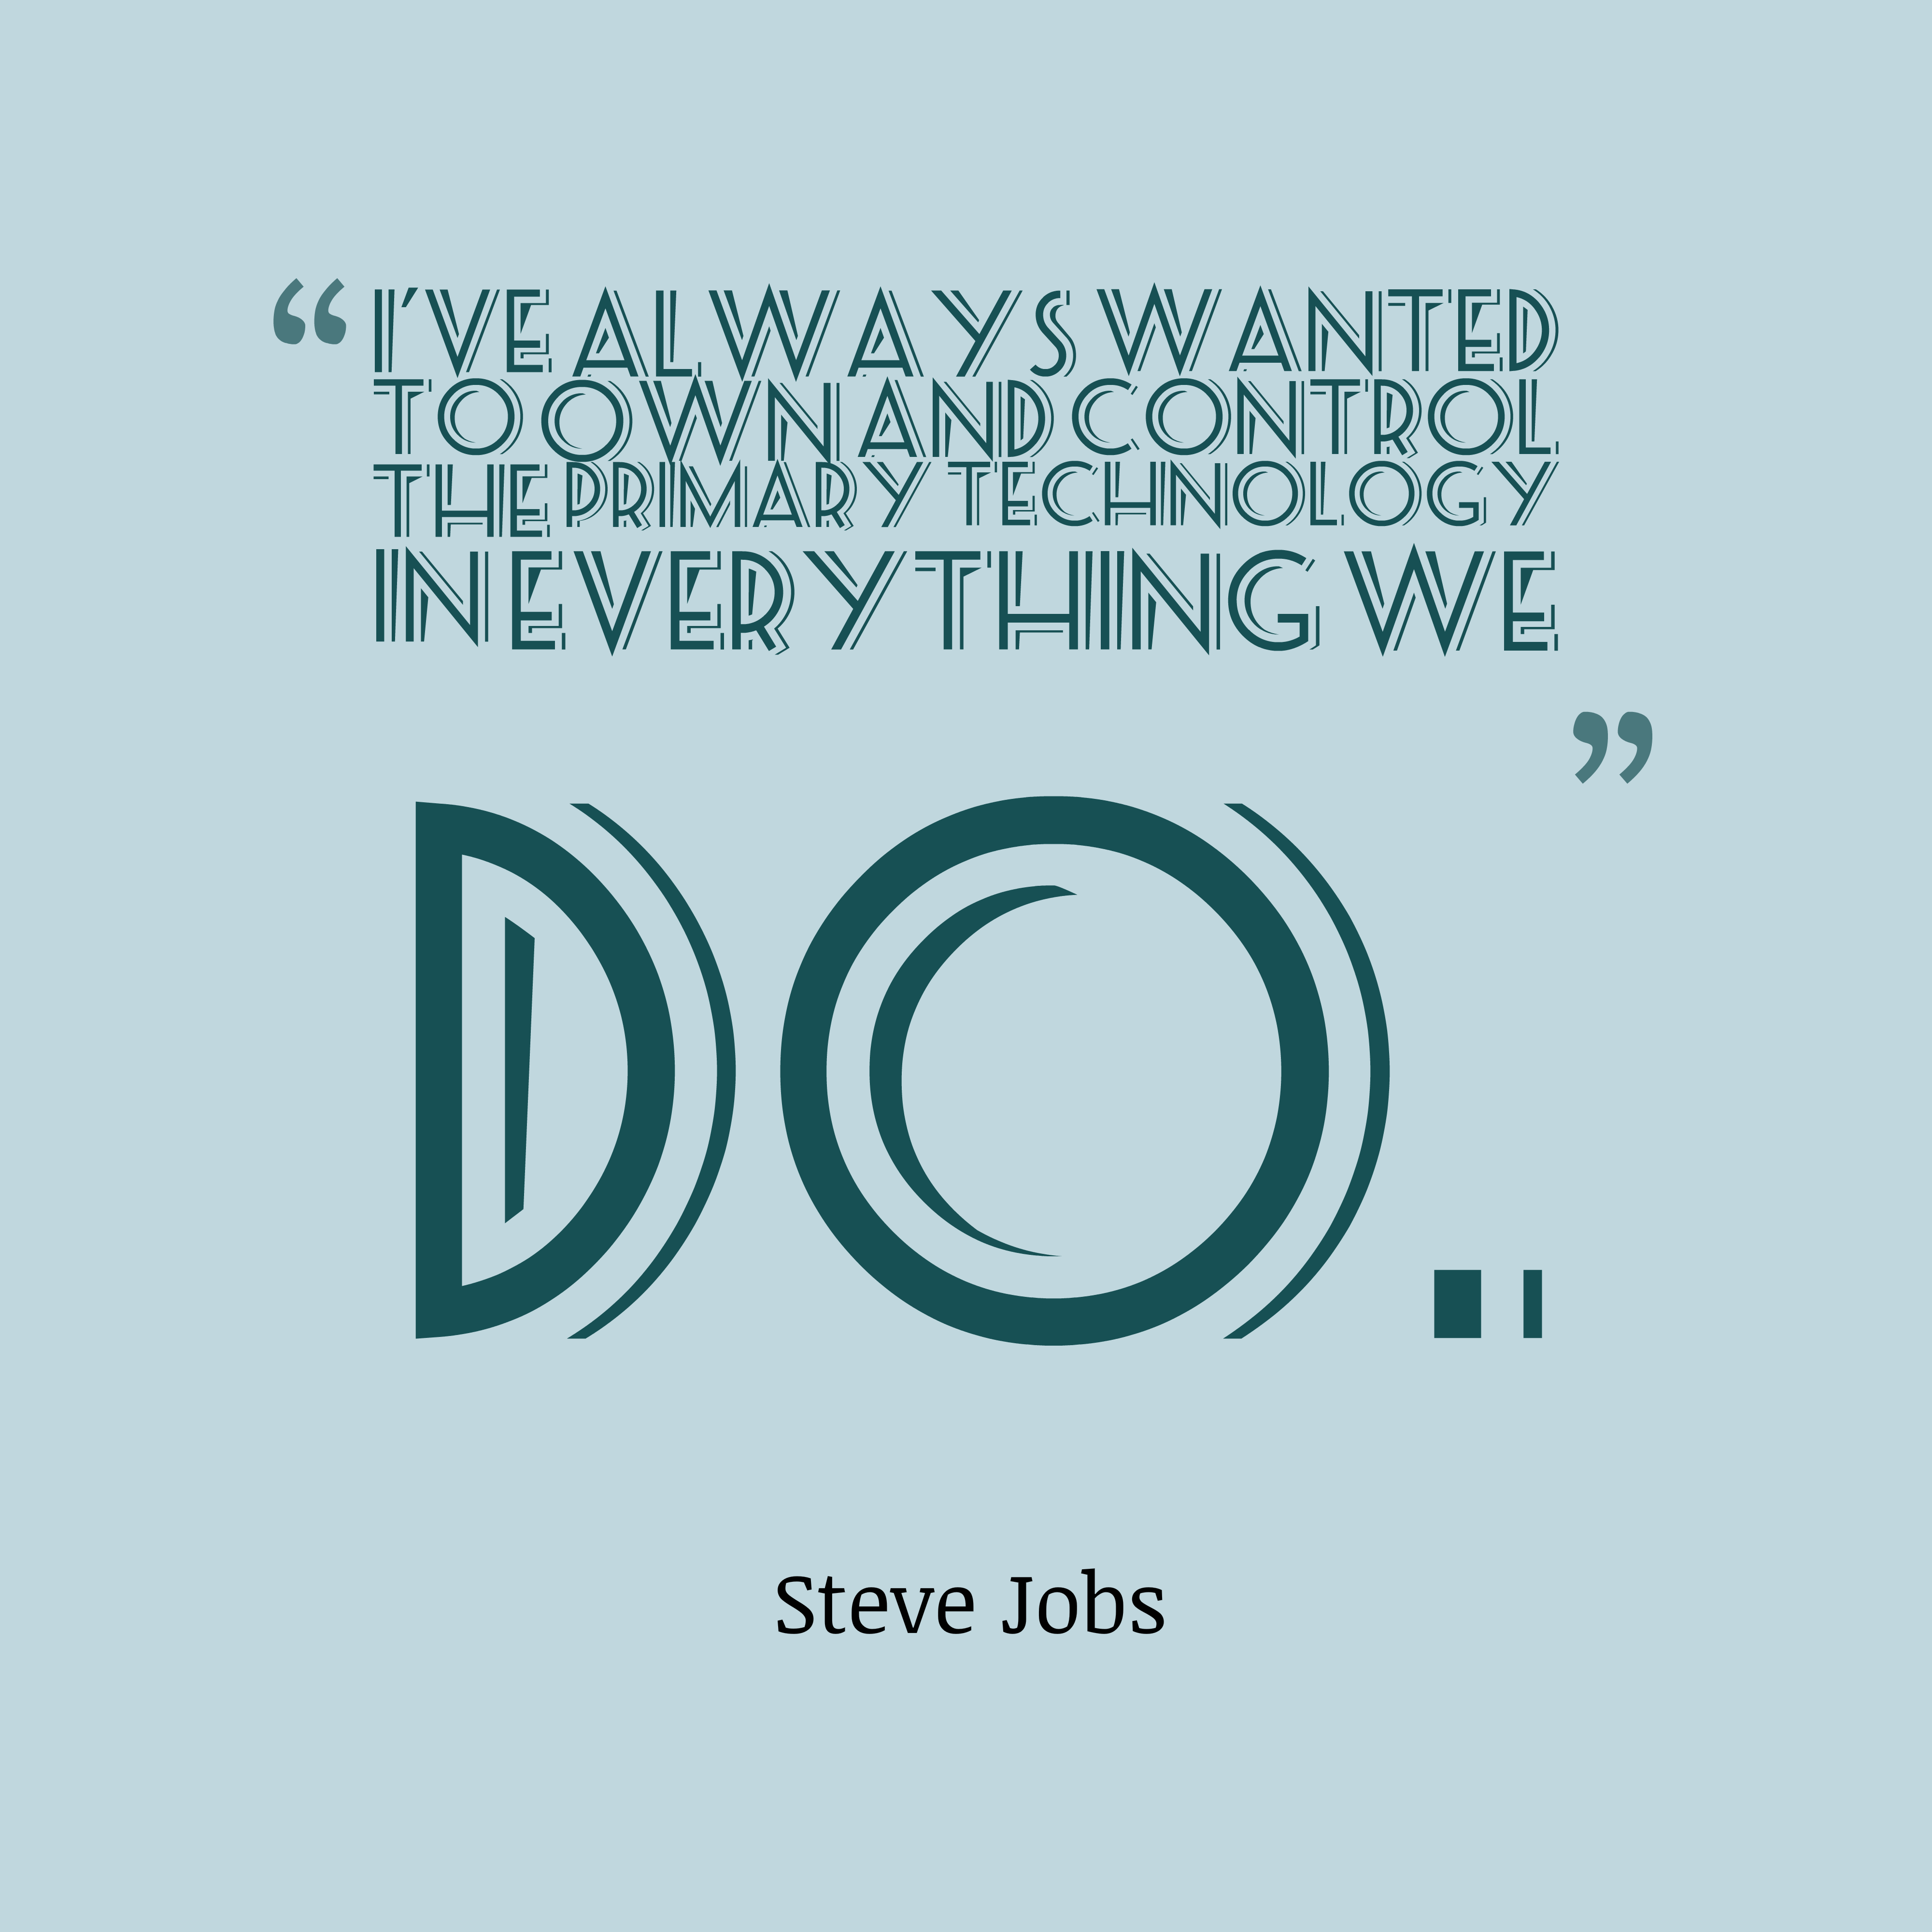 I’ve always wanted to own and control the primary technology in everything we do. steve jobs